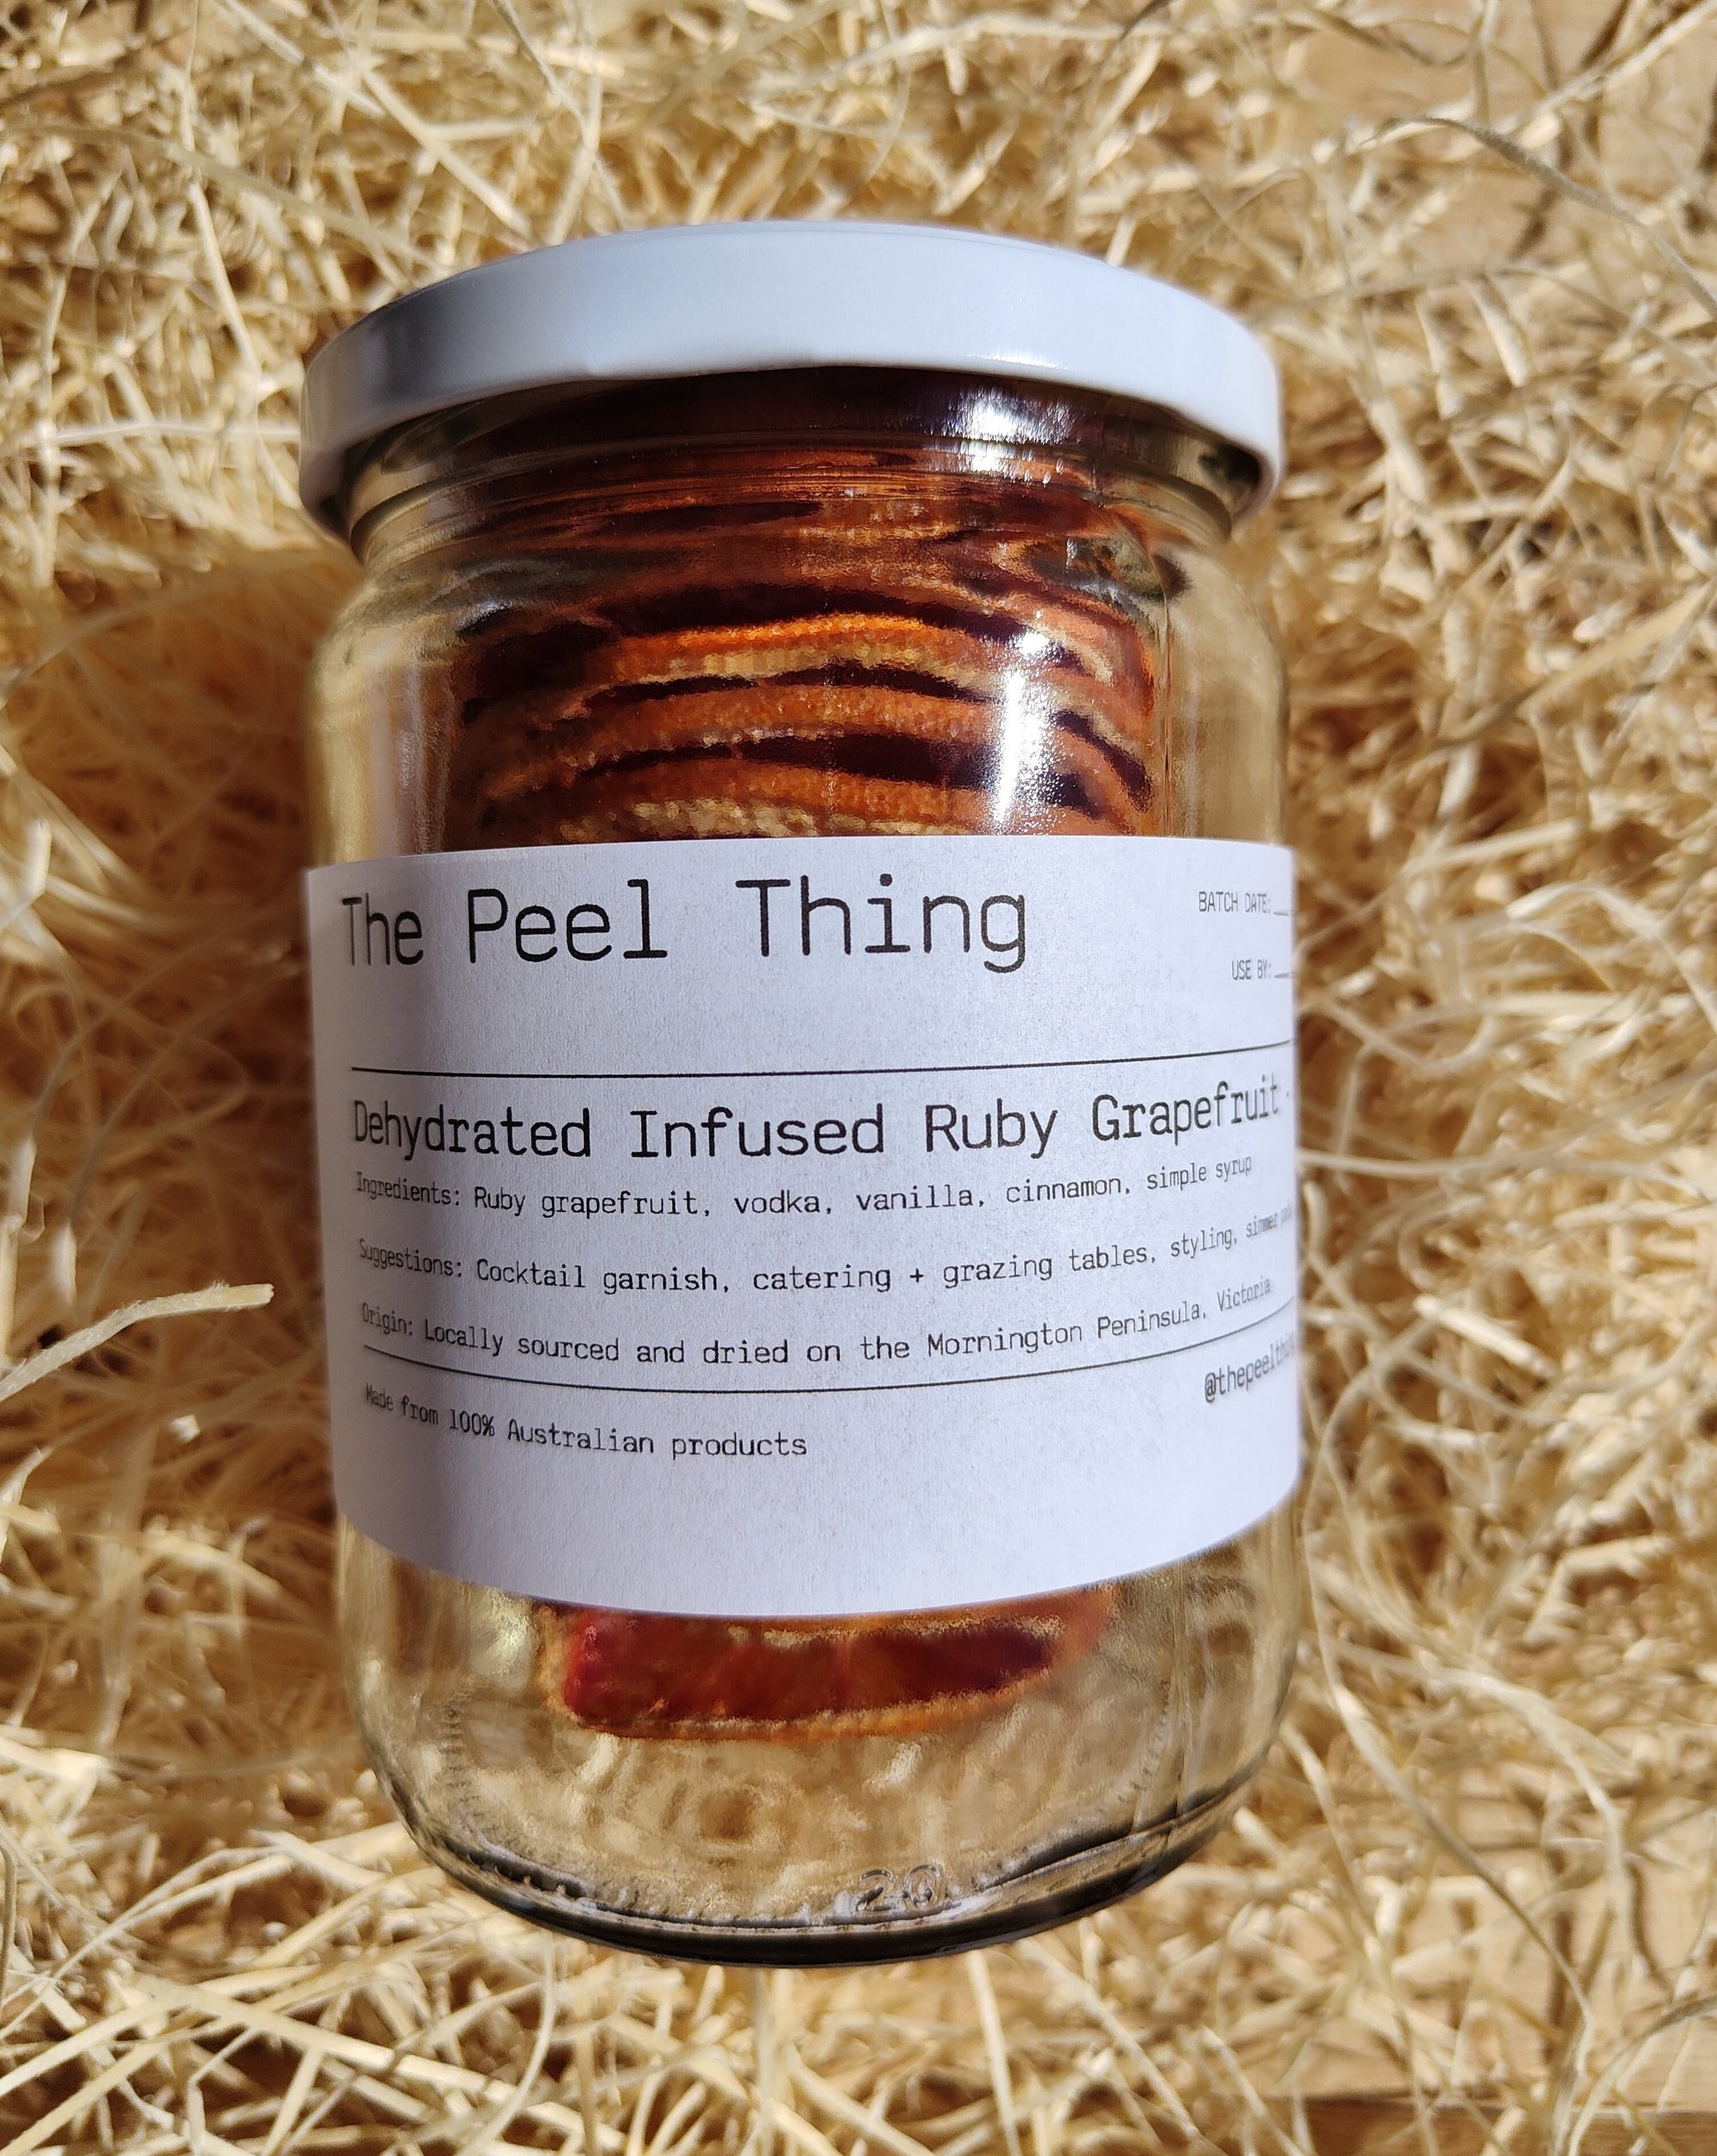 The Peel Thing Infused Ruby Grapefruit